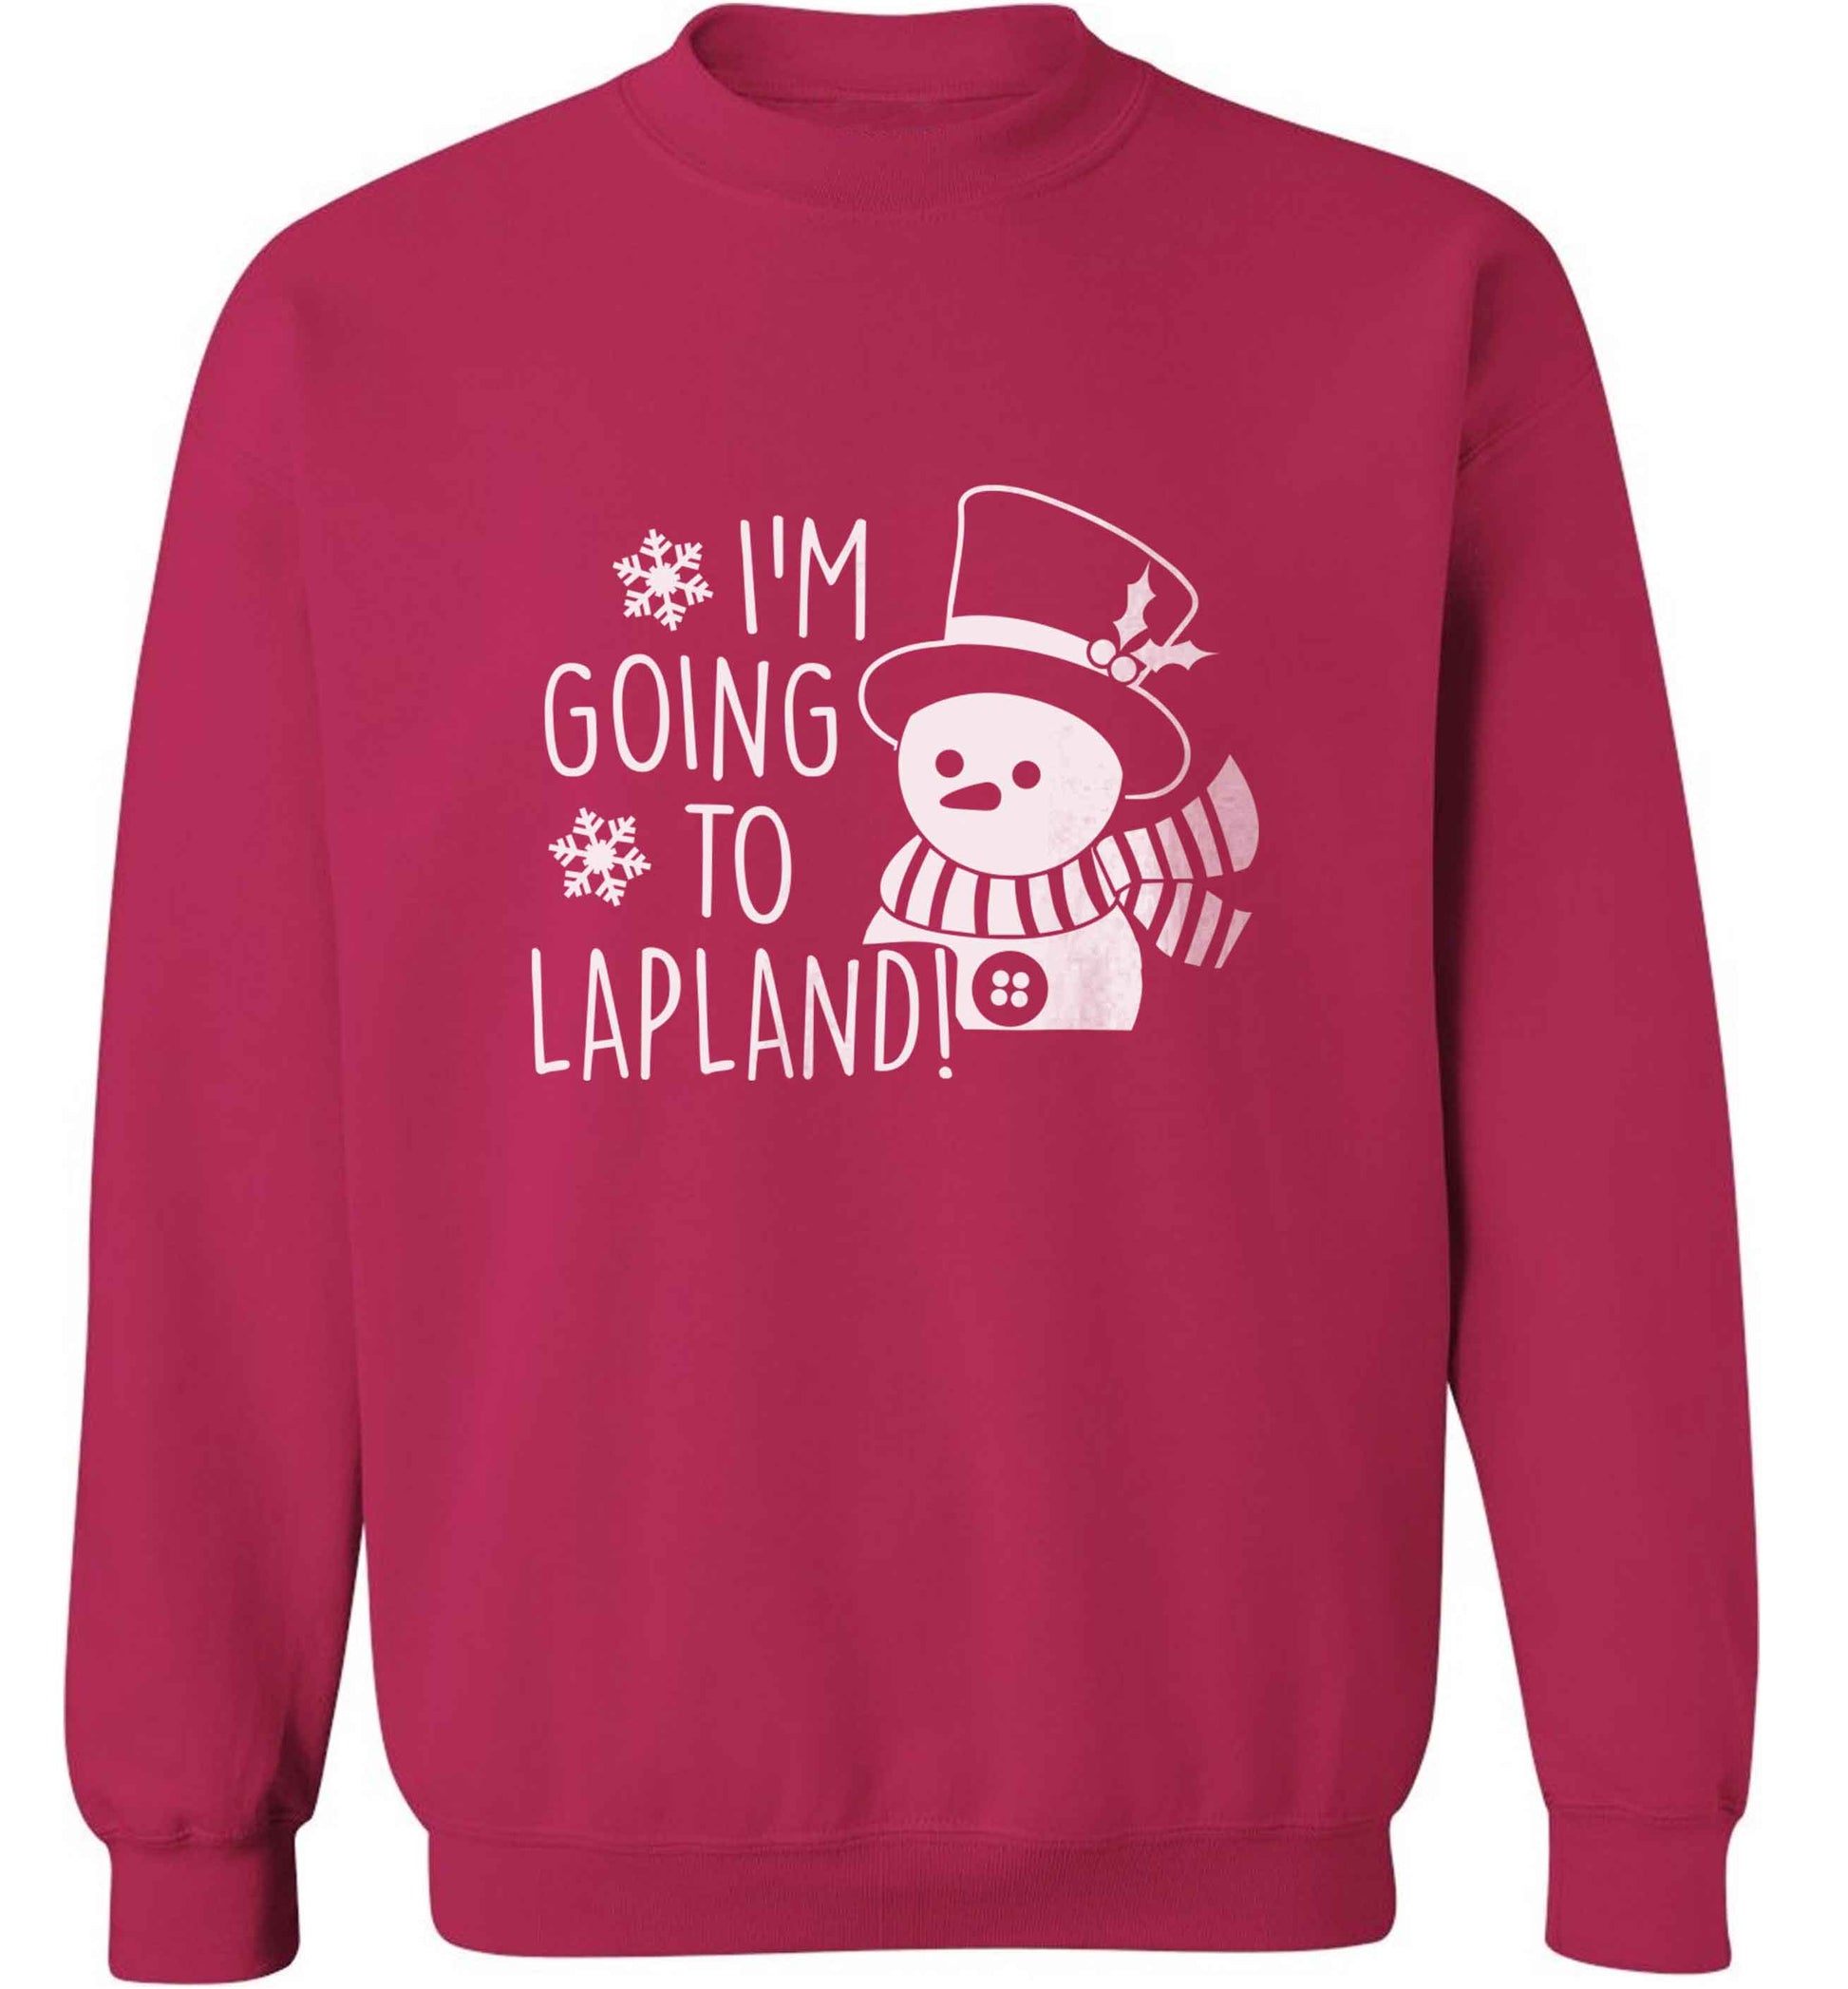 I'm going to Lapland adult's unisex pink sweater 2XL